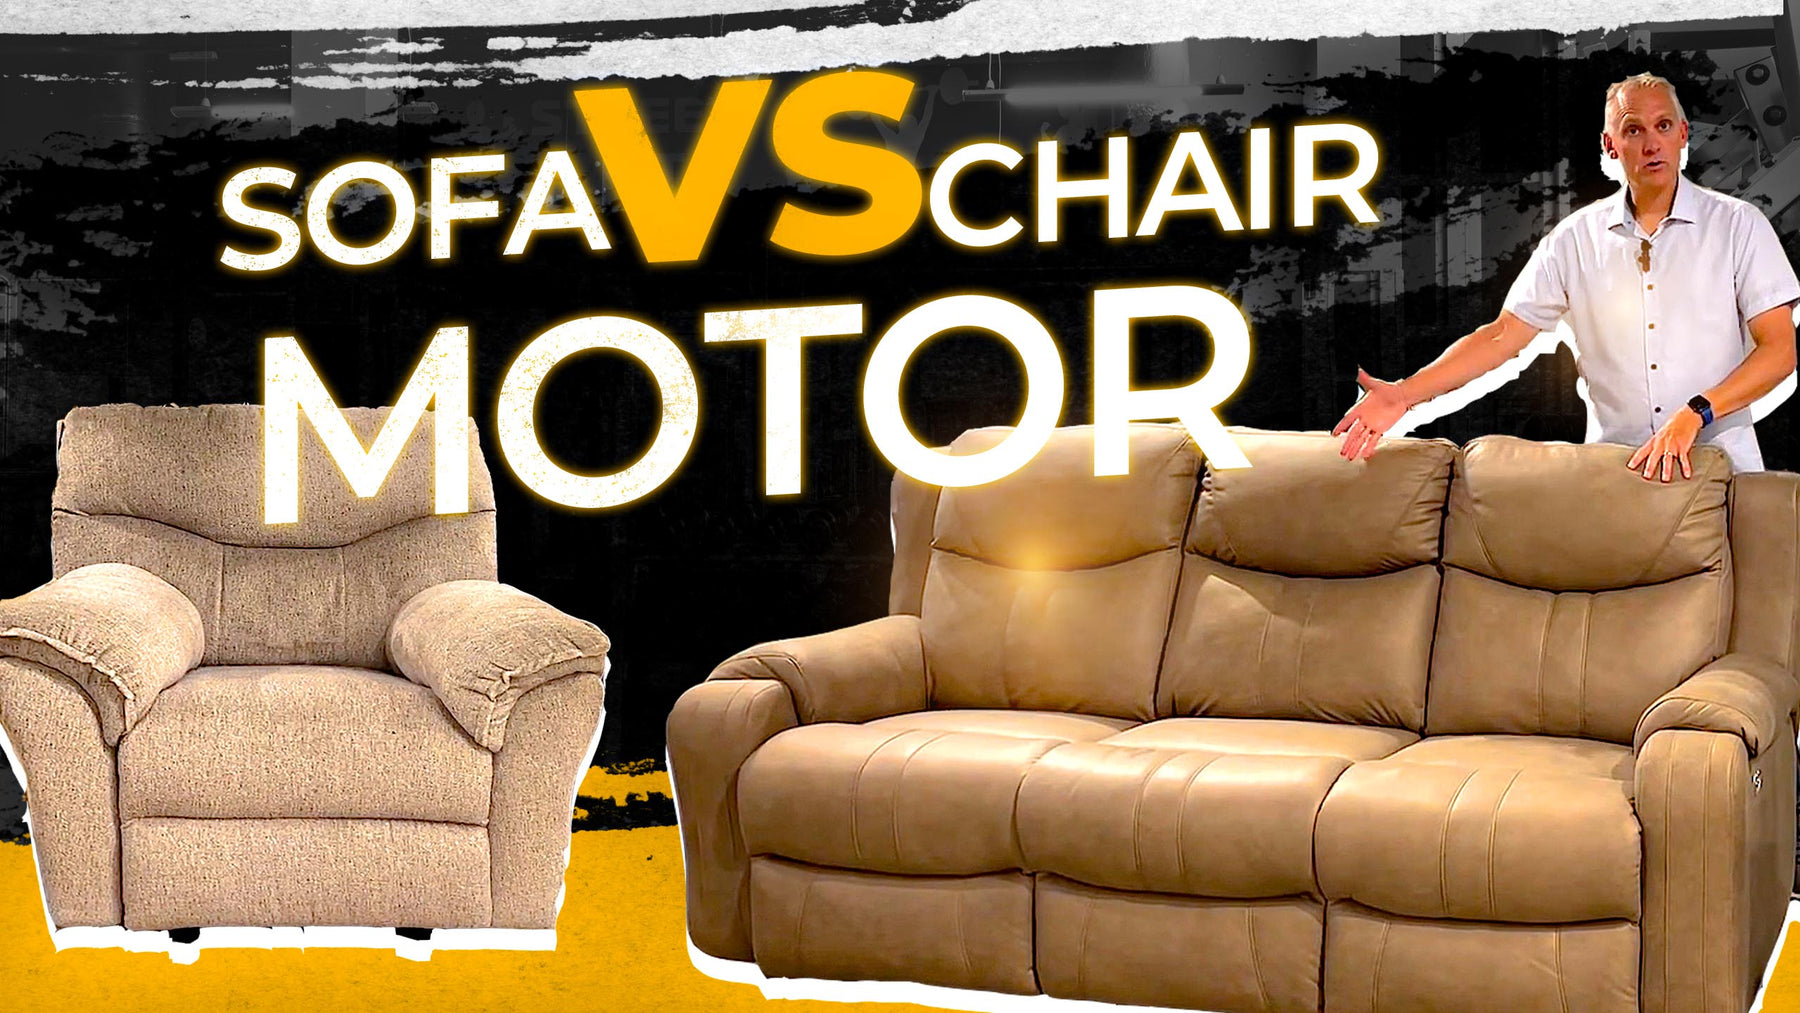 How to know if you have a Southern Motion sofa or chair motor?